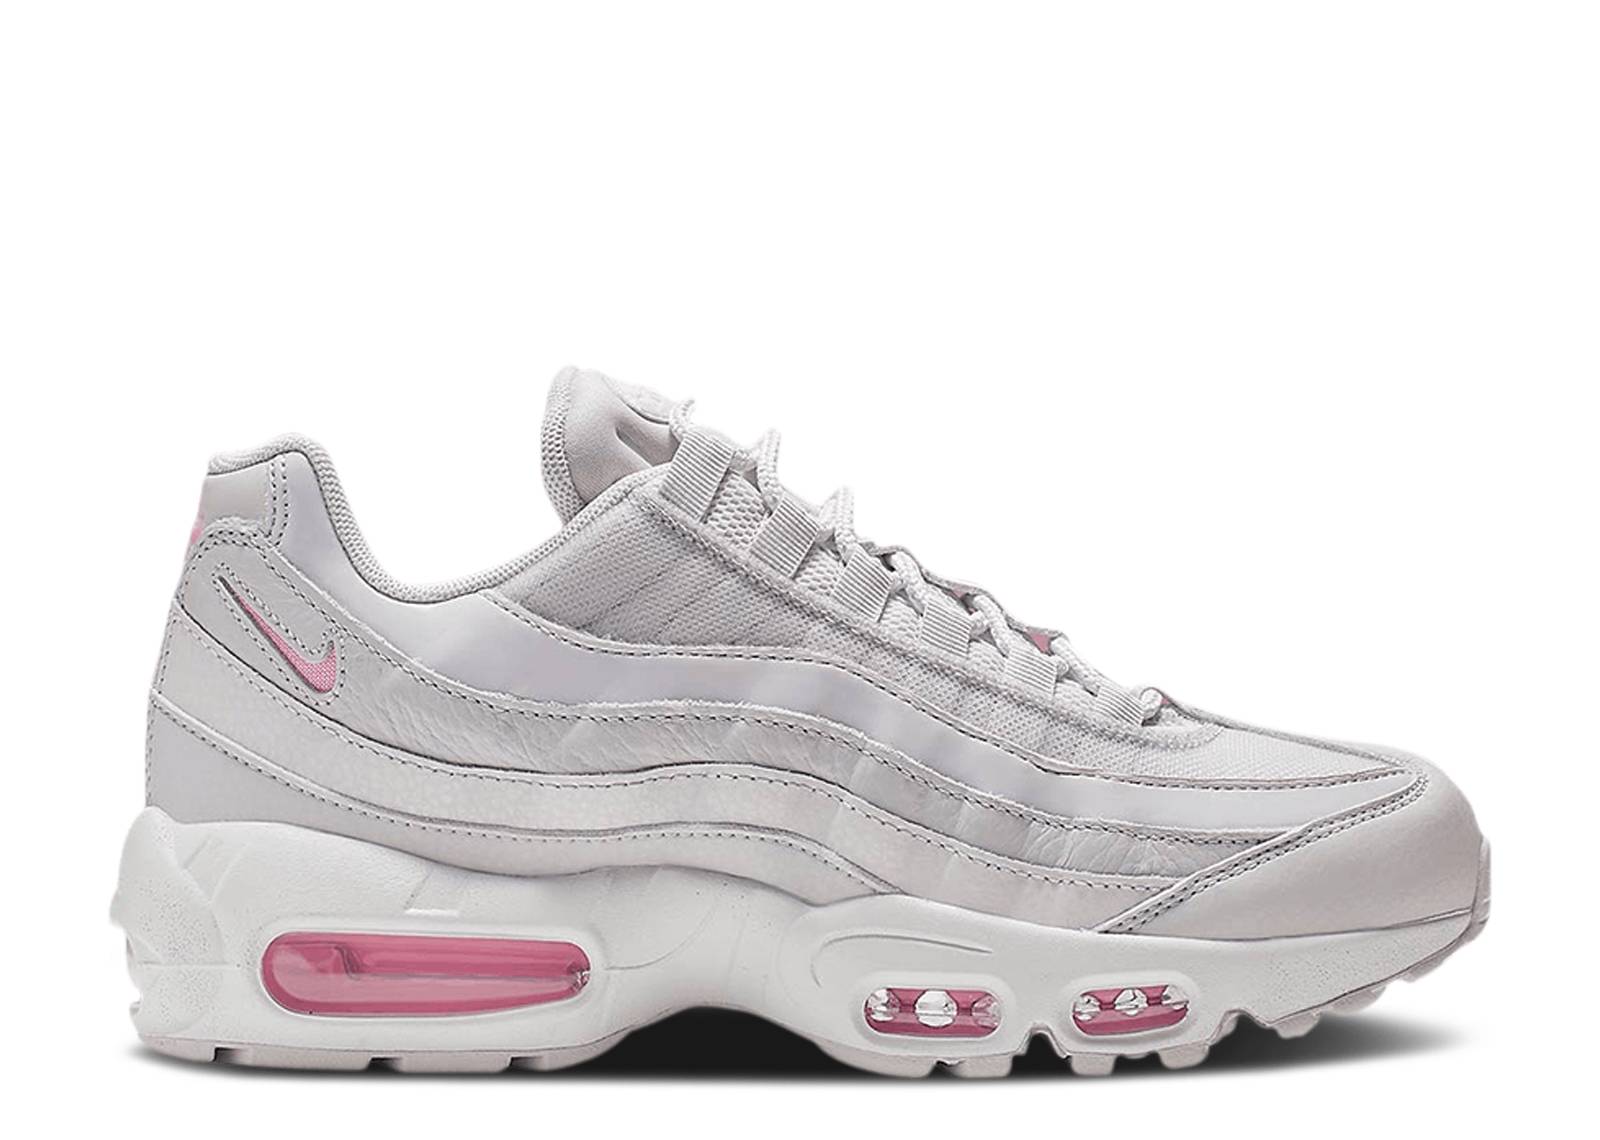 Wmns Air Max 95 'Psychic Pink'